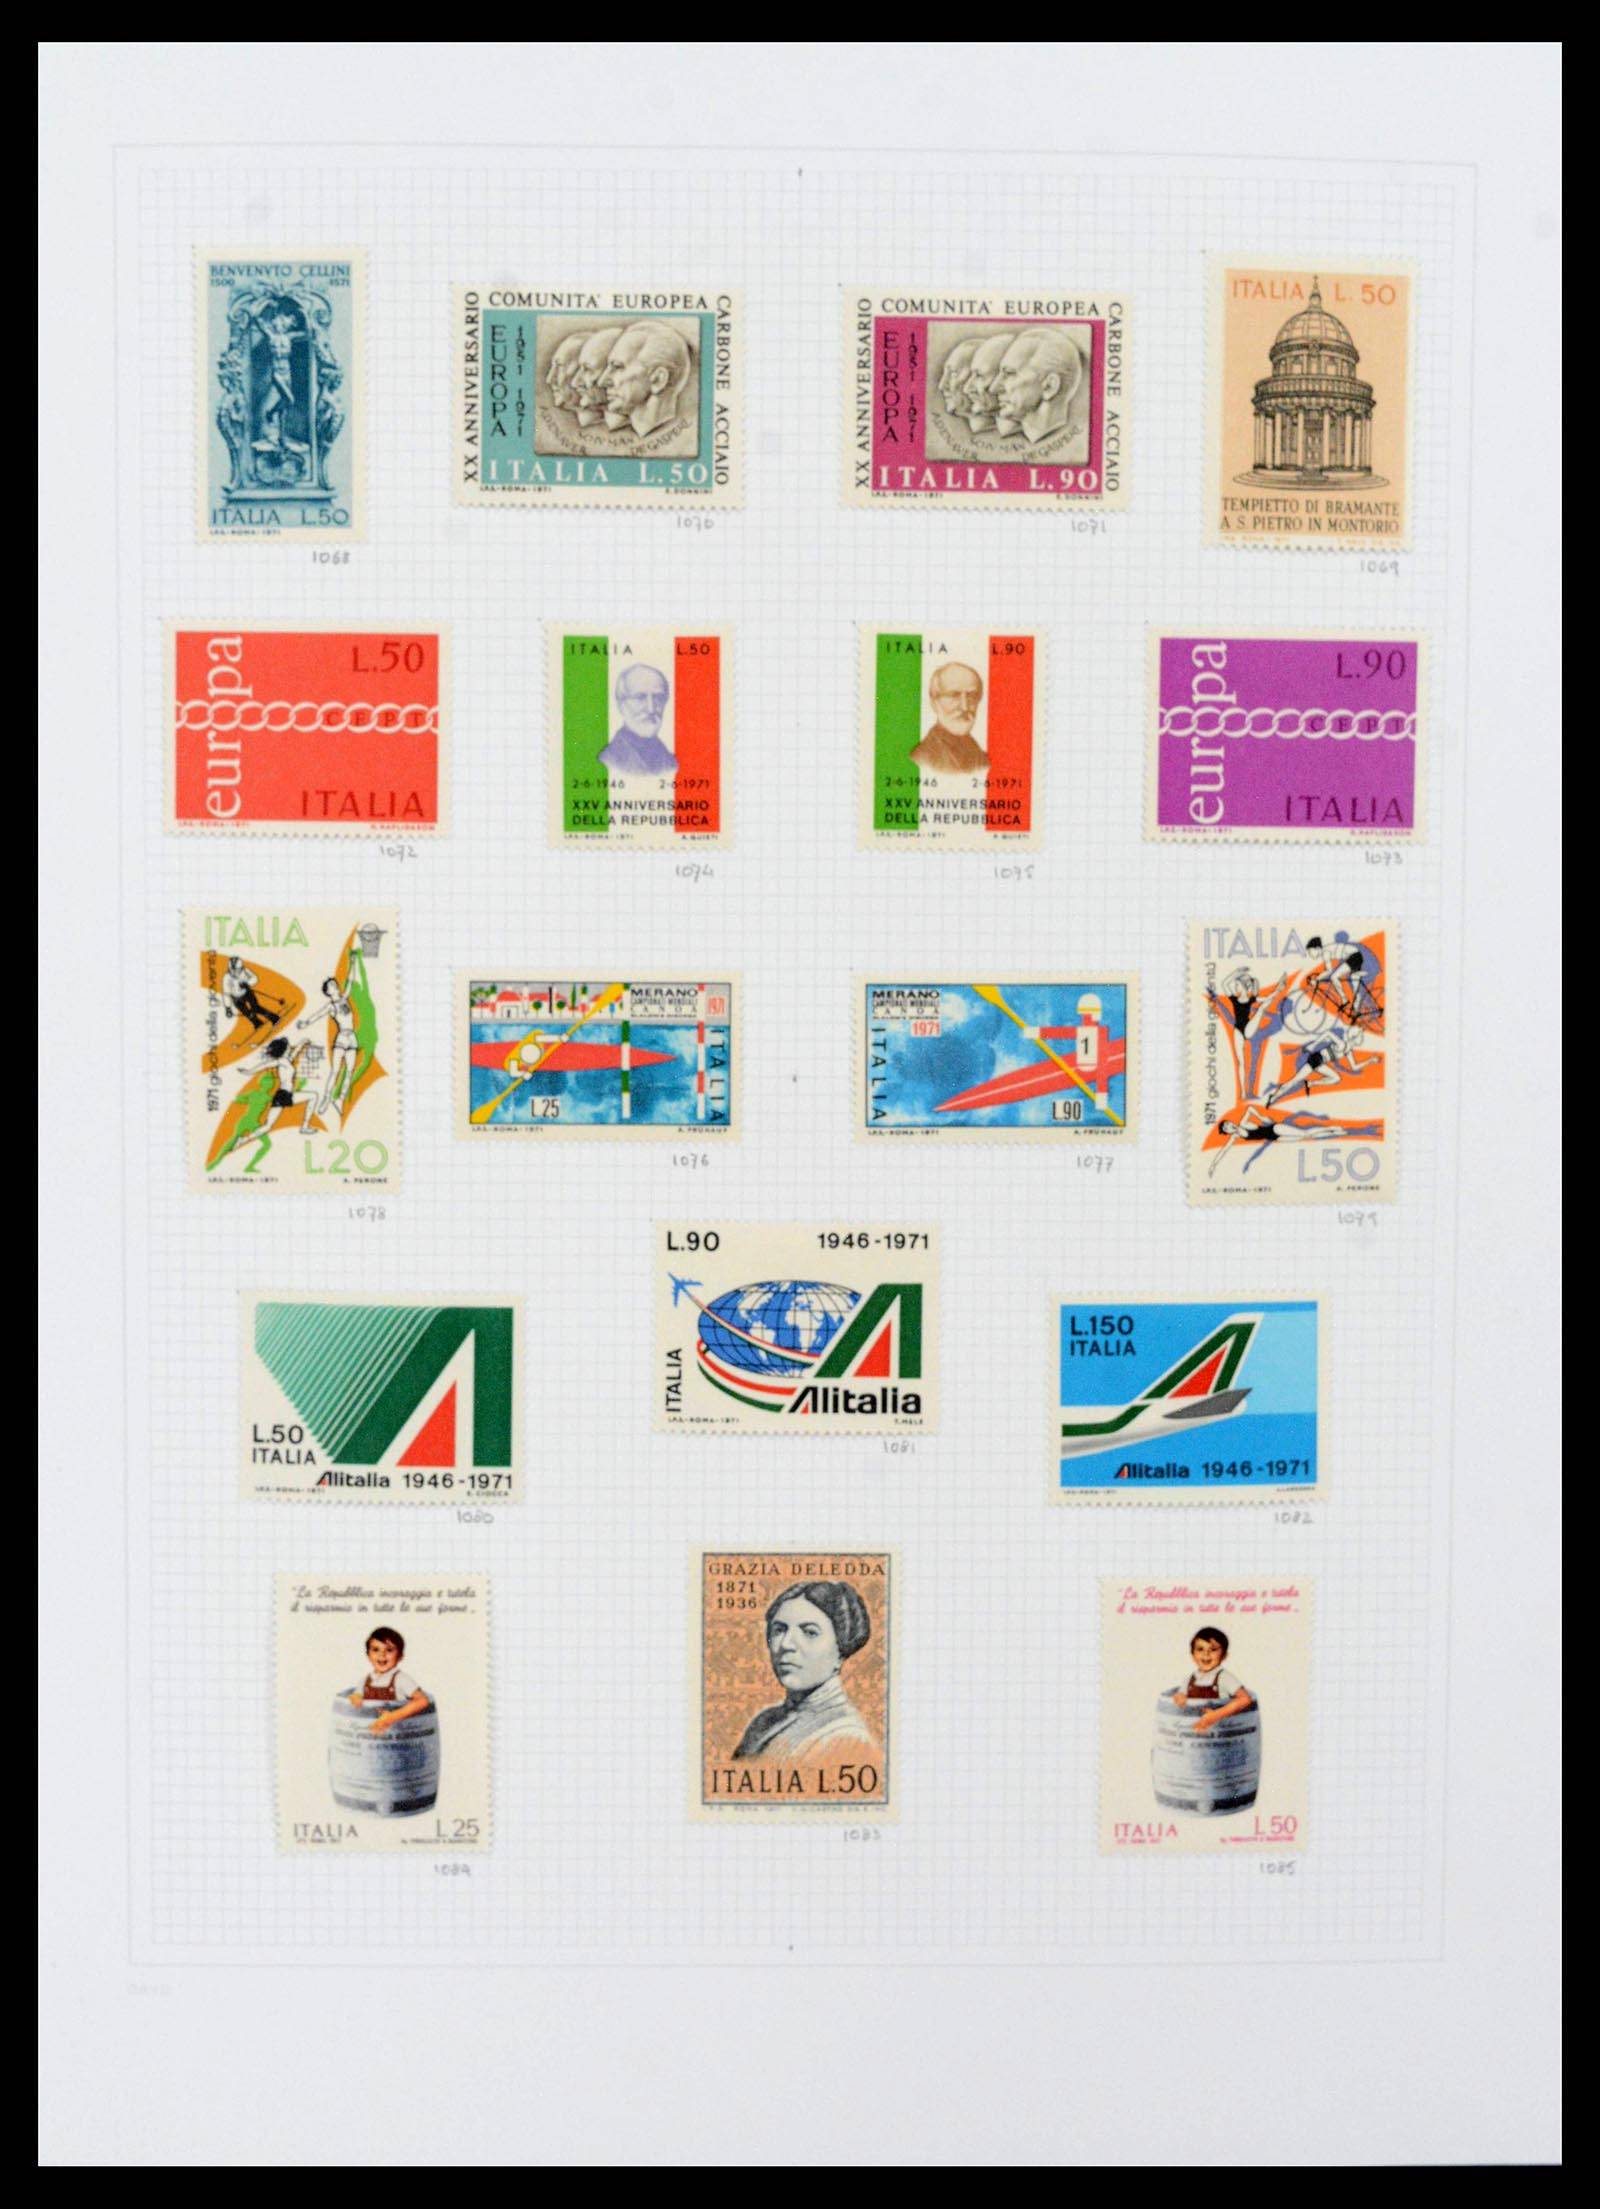 38190 0050 - Stamp collection 38190 Italië 1861-2018!